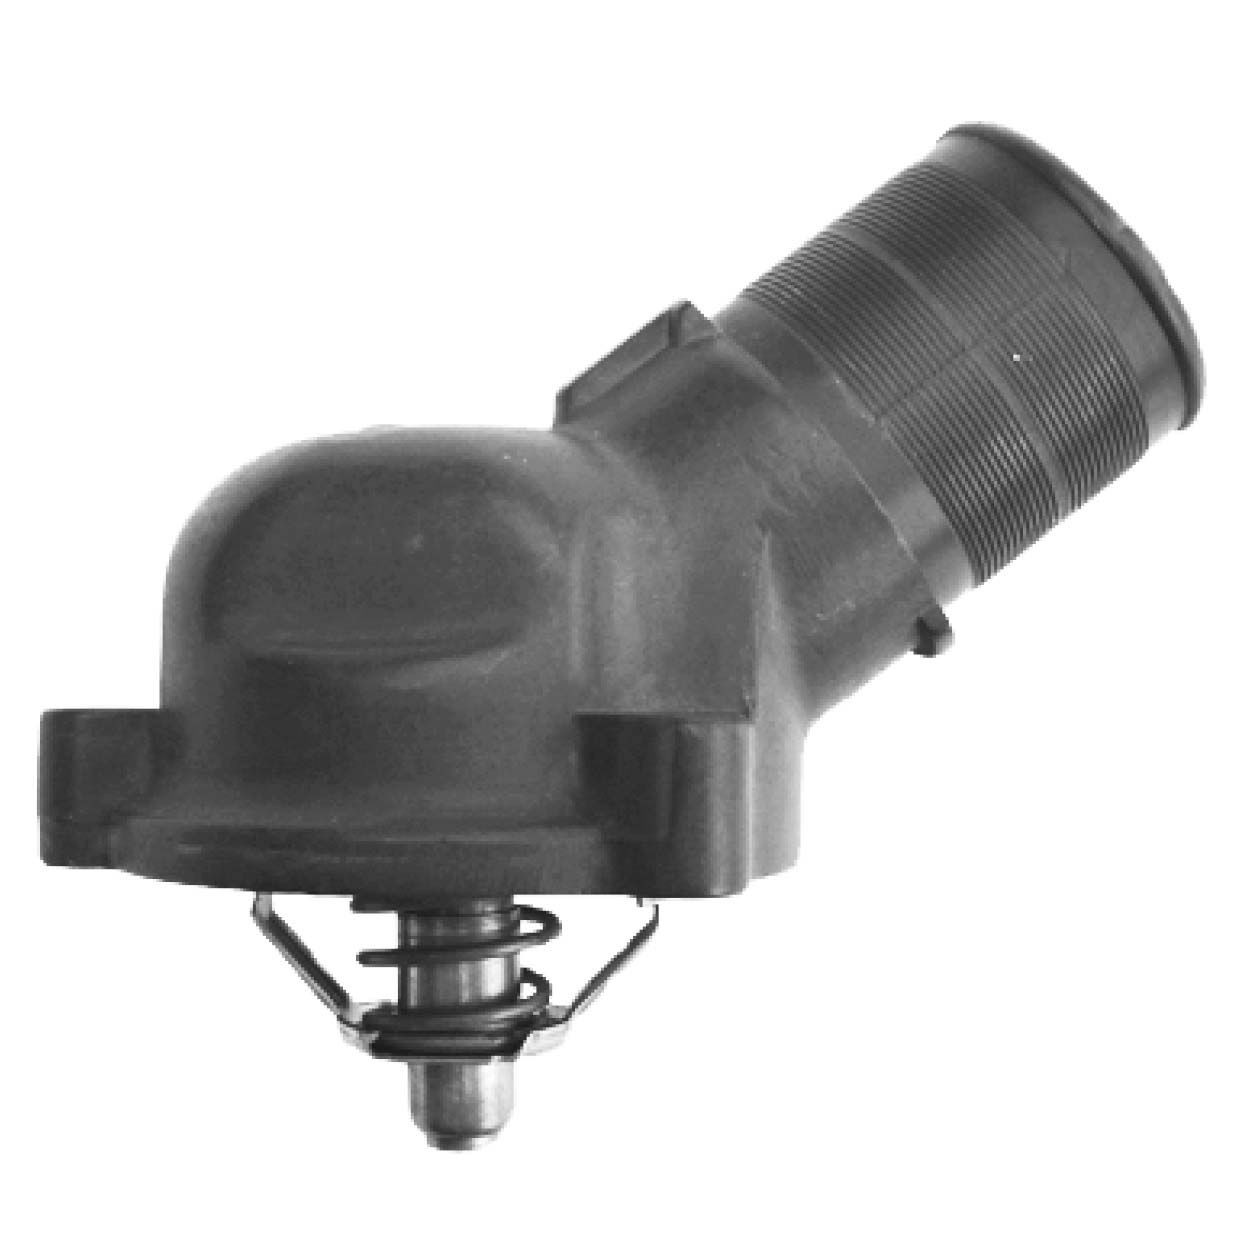 GATES TH34985G1 Engine thermostat Opening Temperature: 85°C, with gaskets/seals, with housing